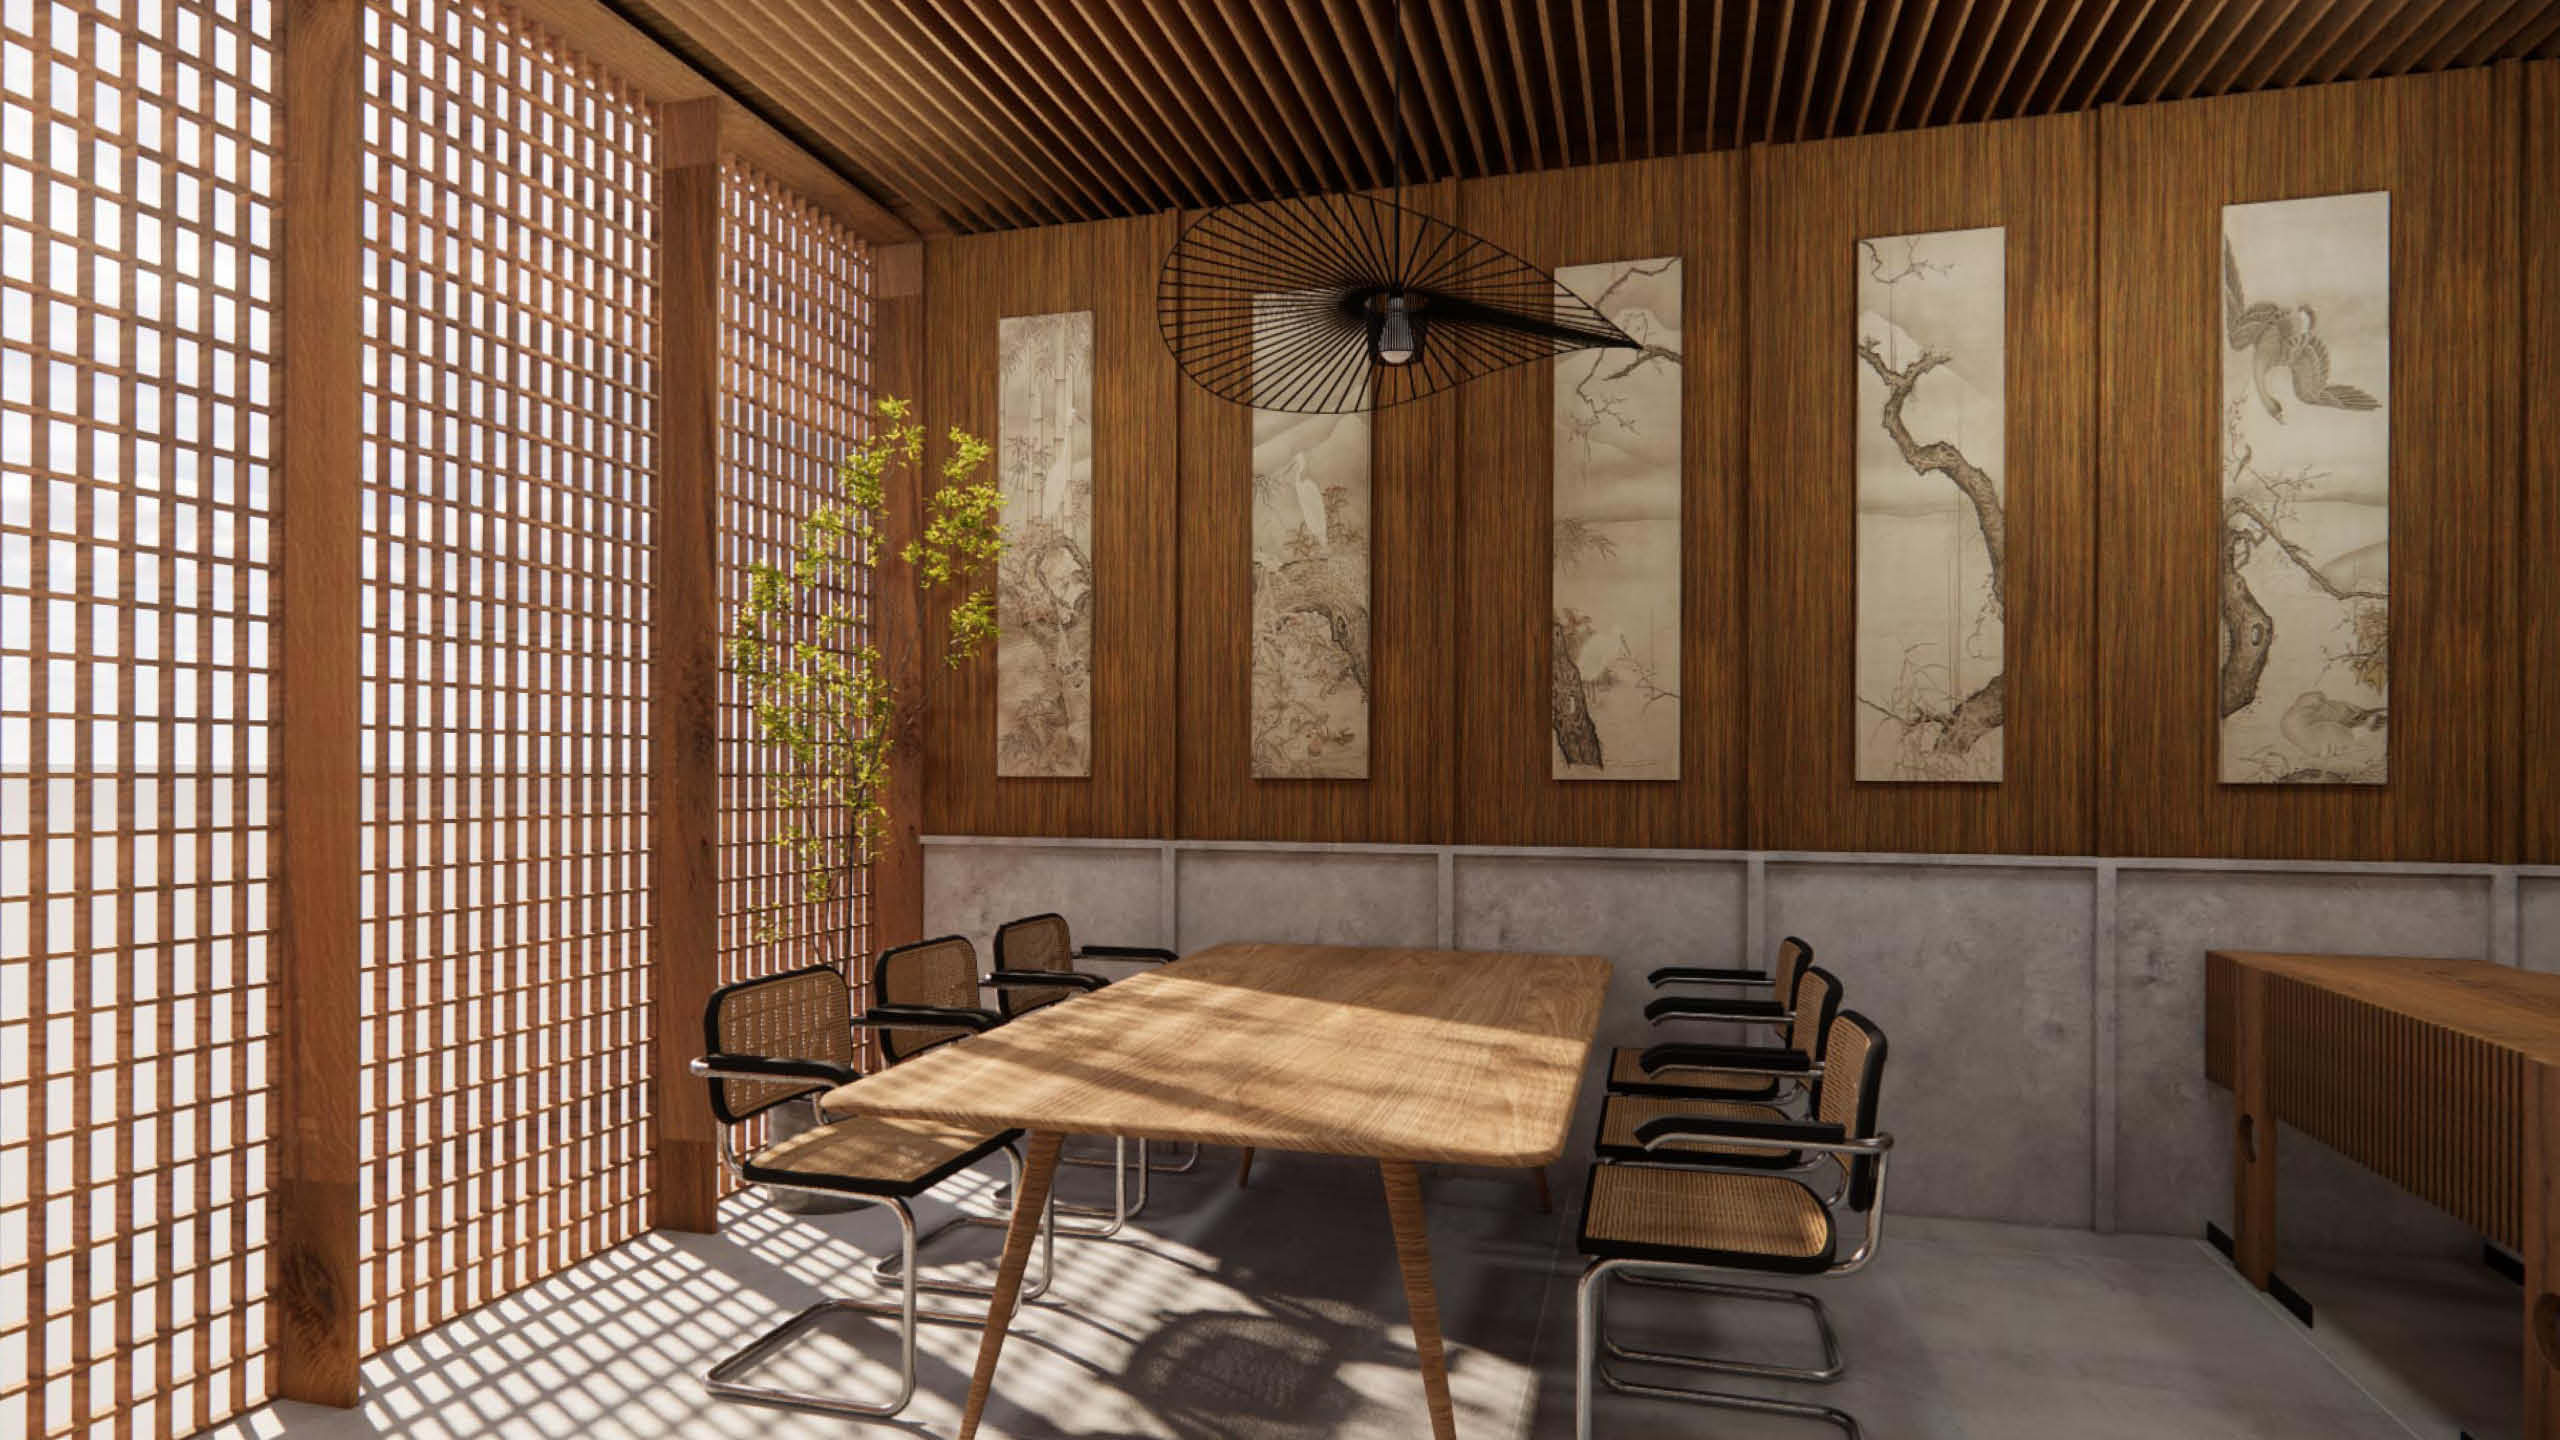 japandi dining area with wooden table, solhiya chairs, and Japanese screens and paintings on the wall.